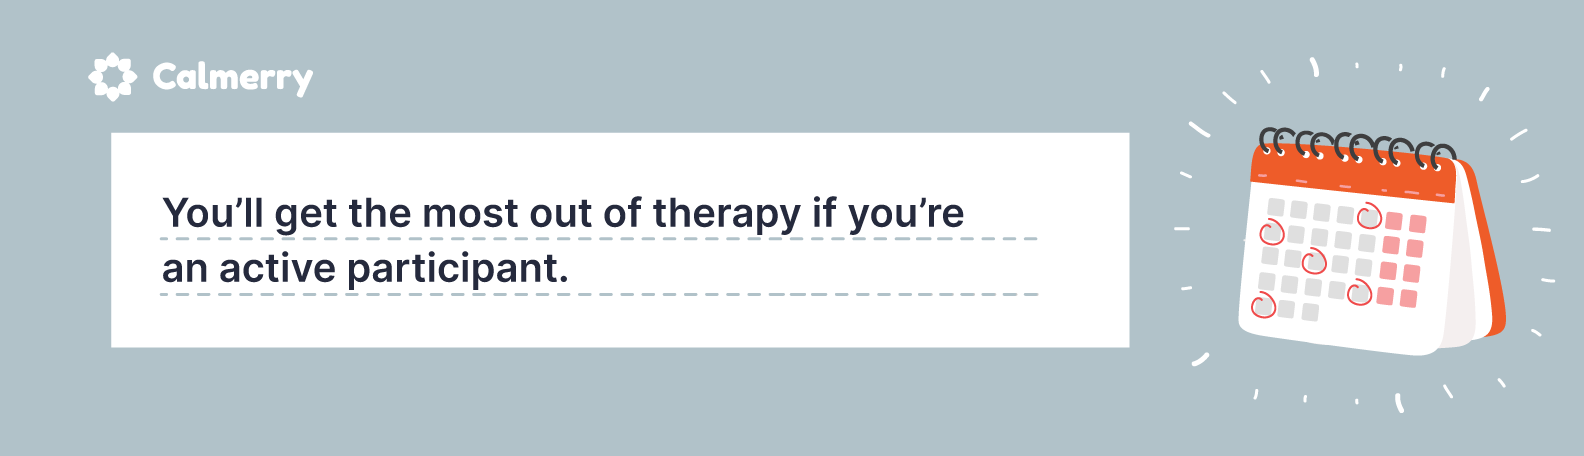 You’ll get the most out of therapy if you’re an active participant